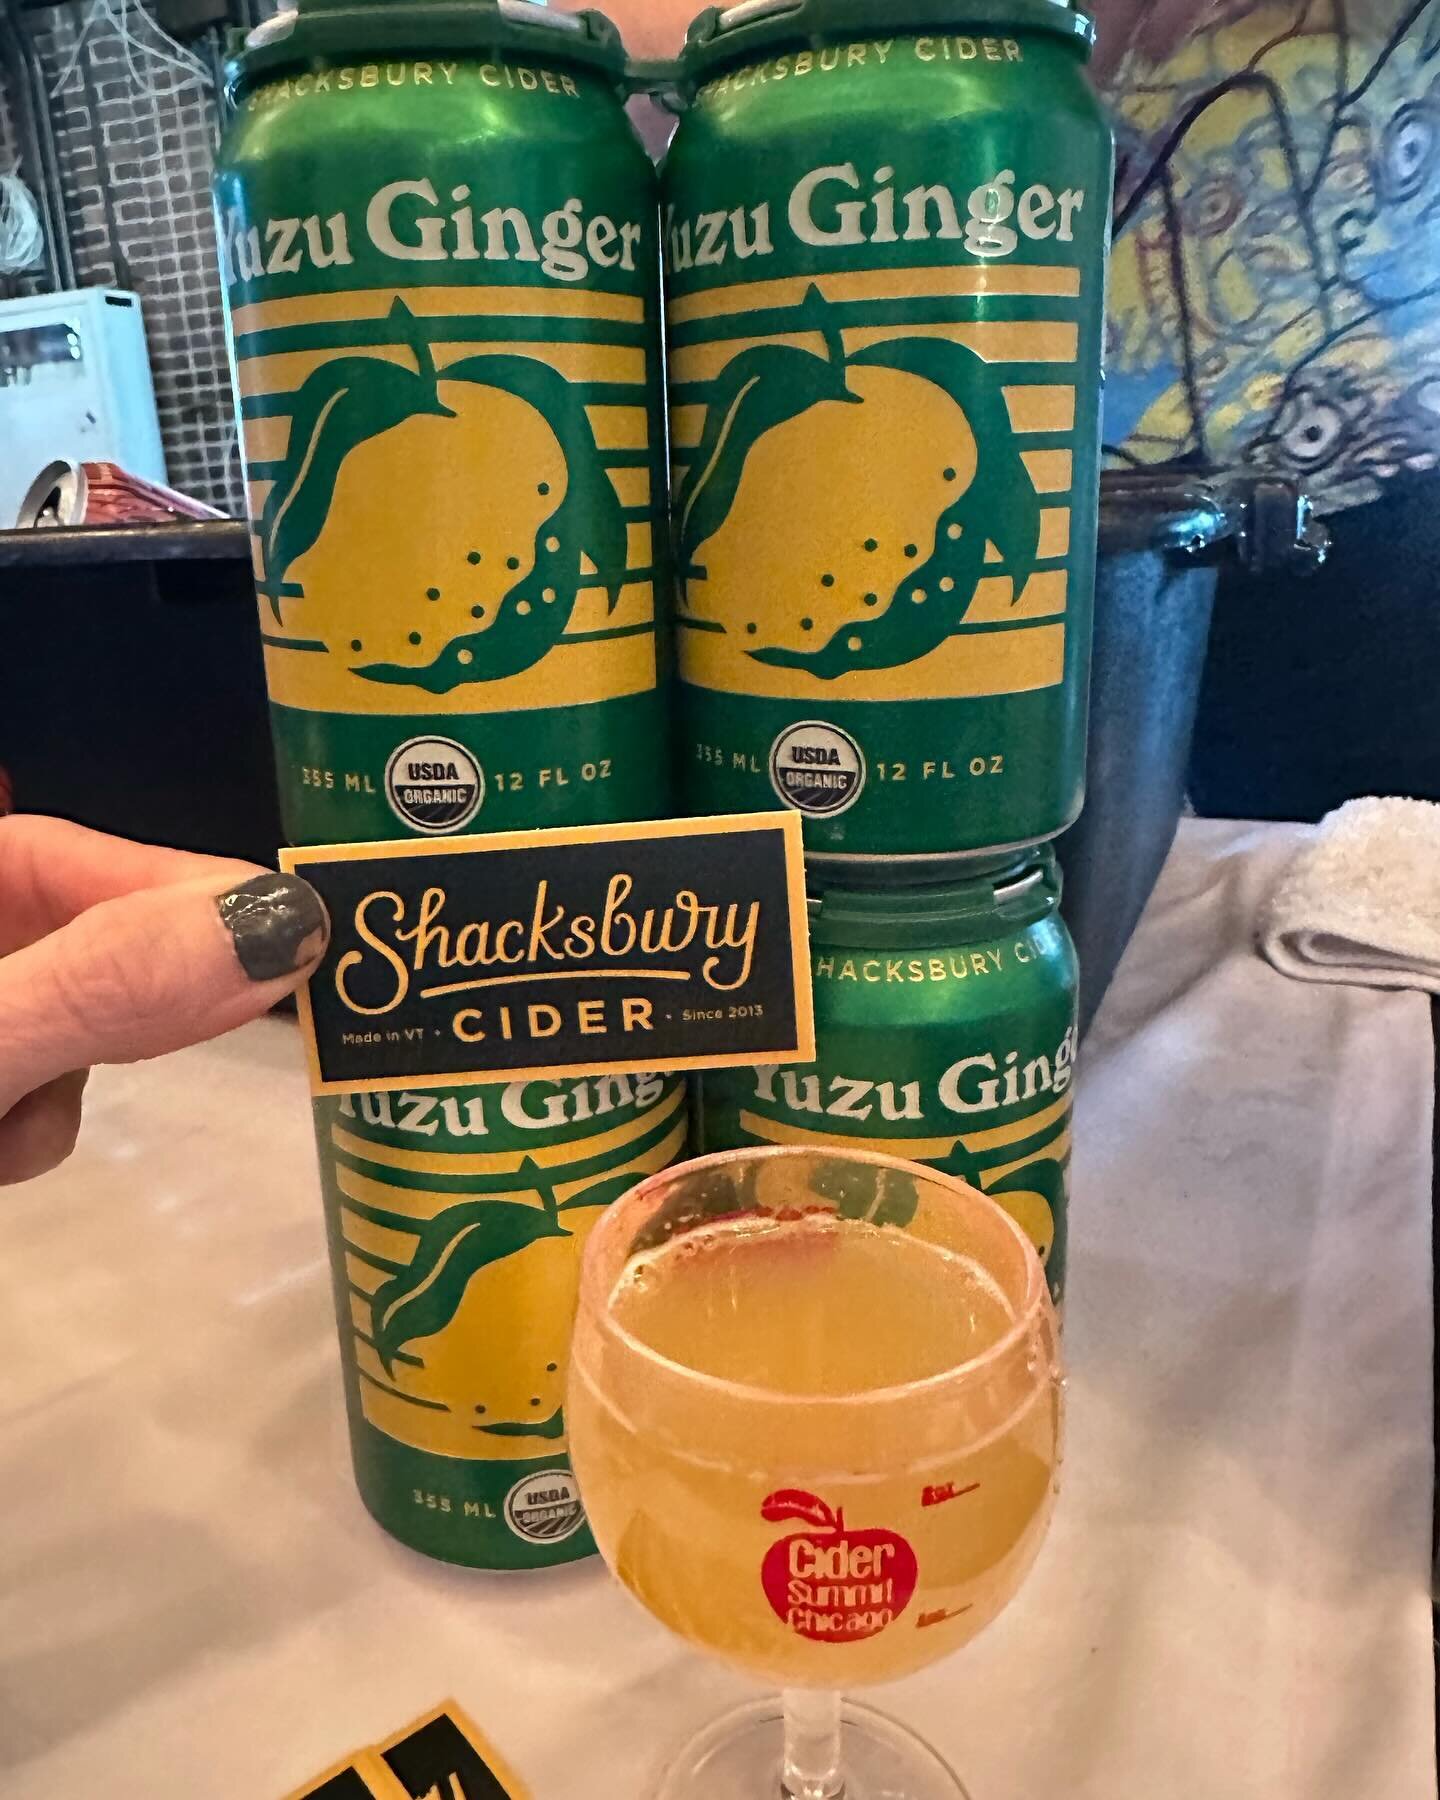 @shacksbury was one vendor that I waited to try until closer to the end of the day, as I had a feeling their &ldquo;yuzu ginger&rdquo; and &ldquo;sugar shack&rdquo; would be as flavorful yet light as they are - for those who care about this sort of t